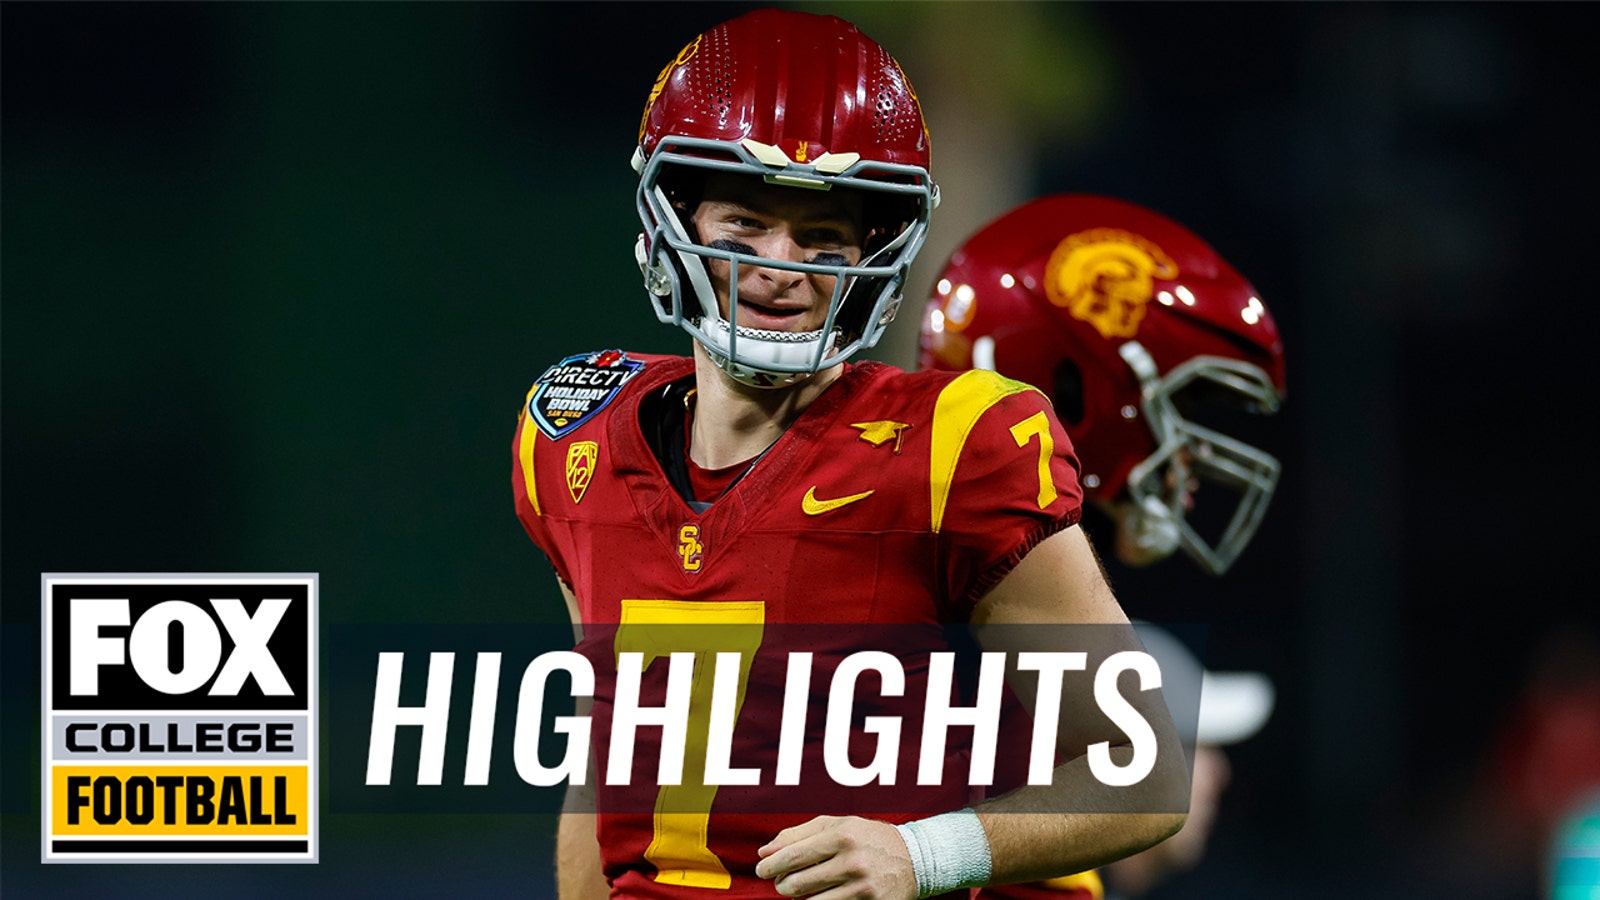 USC's Miller Moss throws six touchdowns in Holiday Bowl win